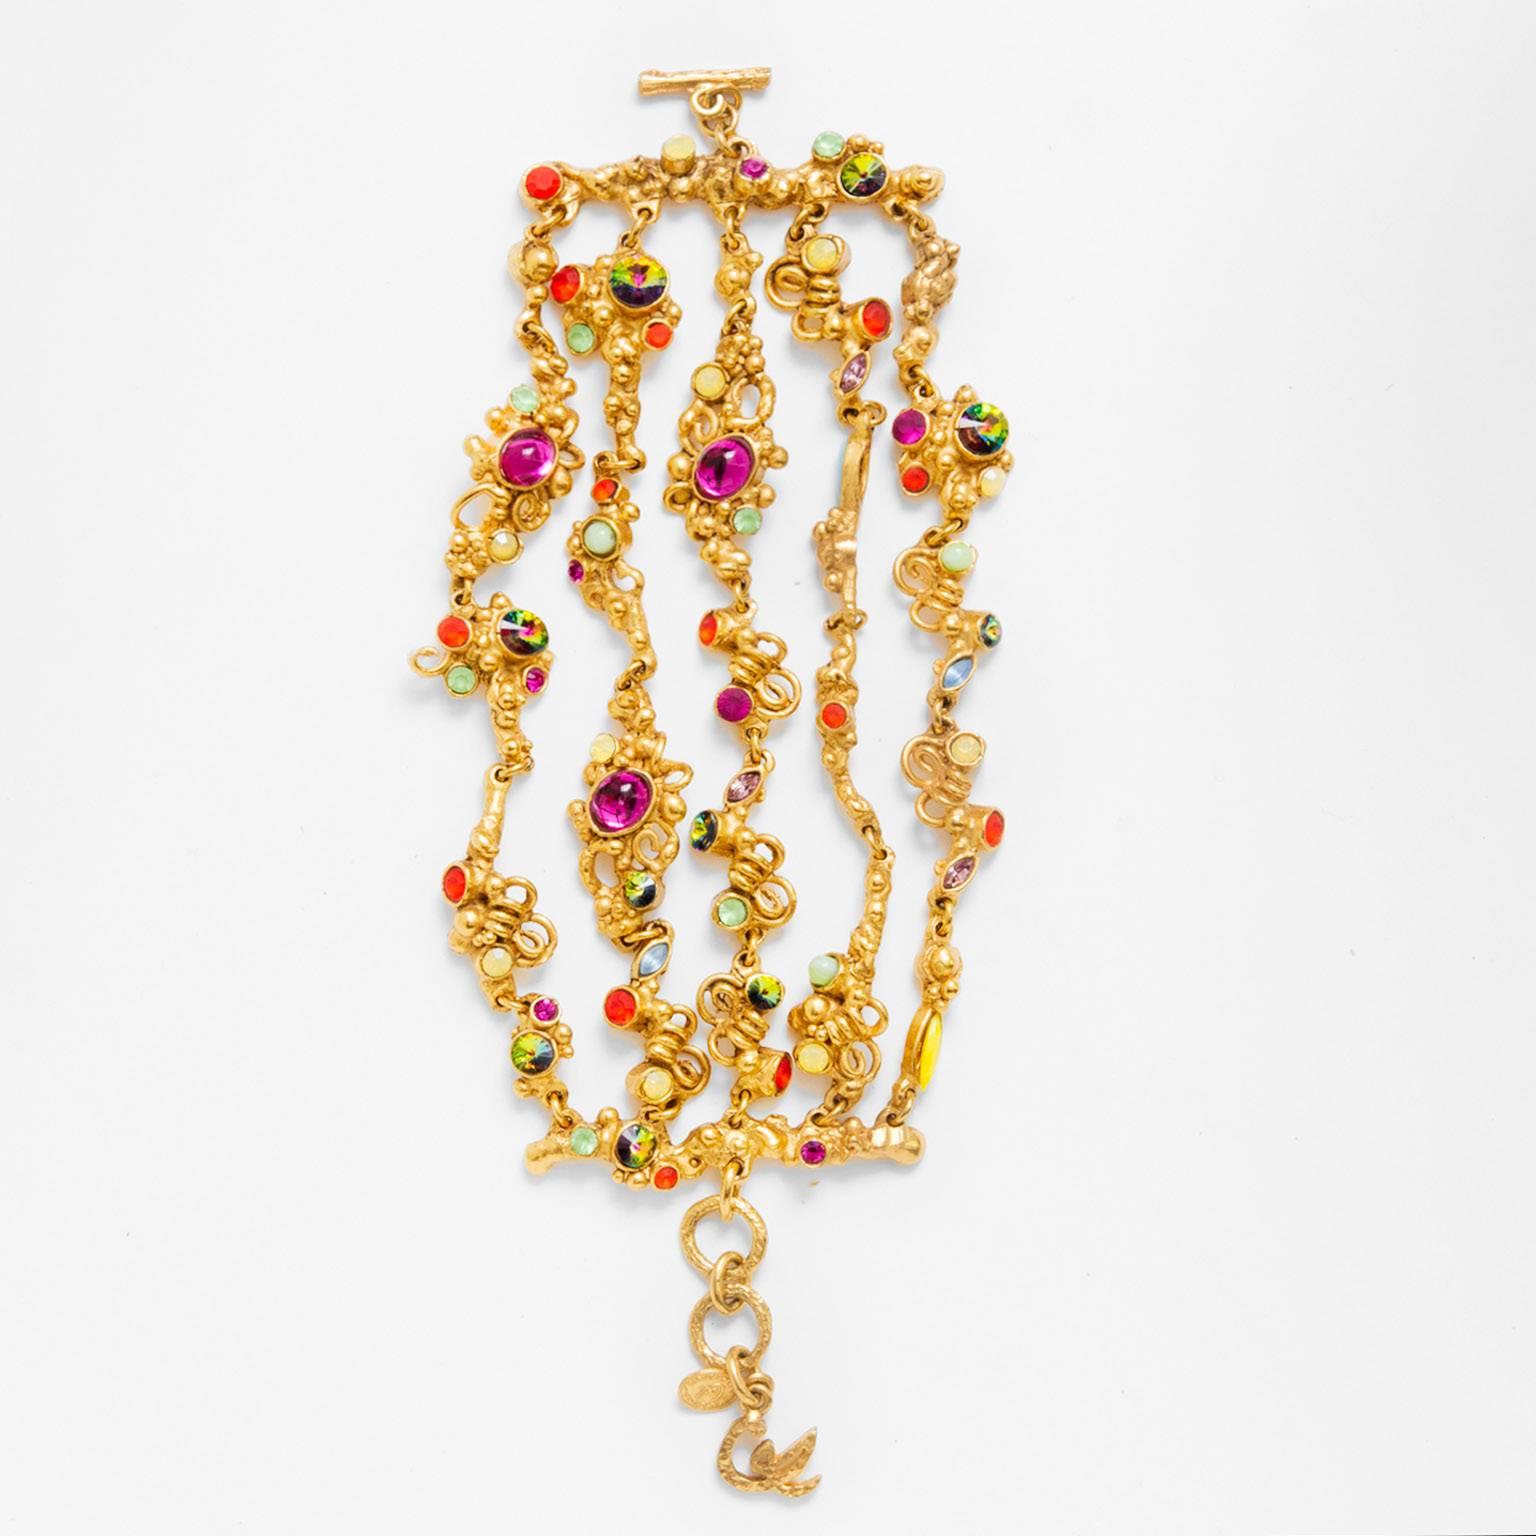 Amazing 1990's Christian Lacroix Multicolor Bracelet 5 Strands 
This amazing bracelet is in gold brass with a 